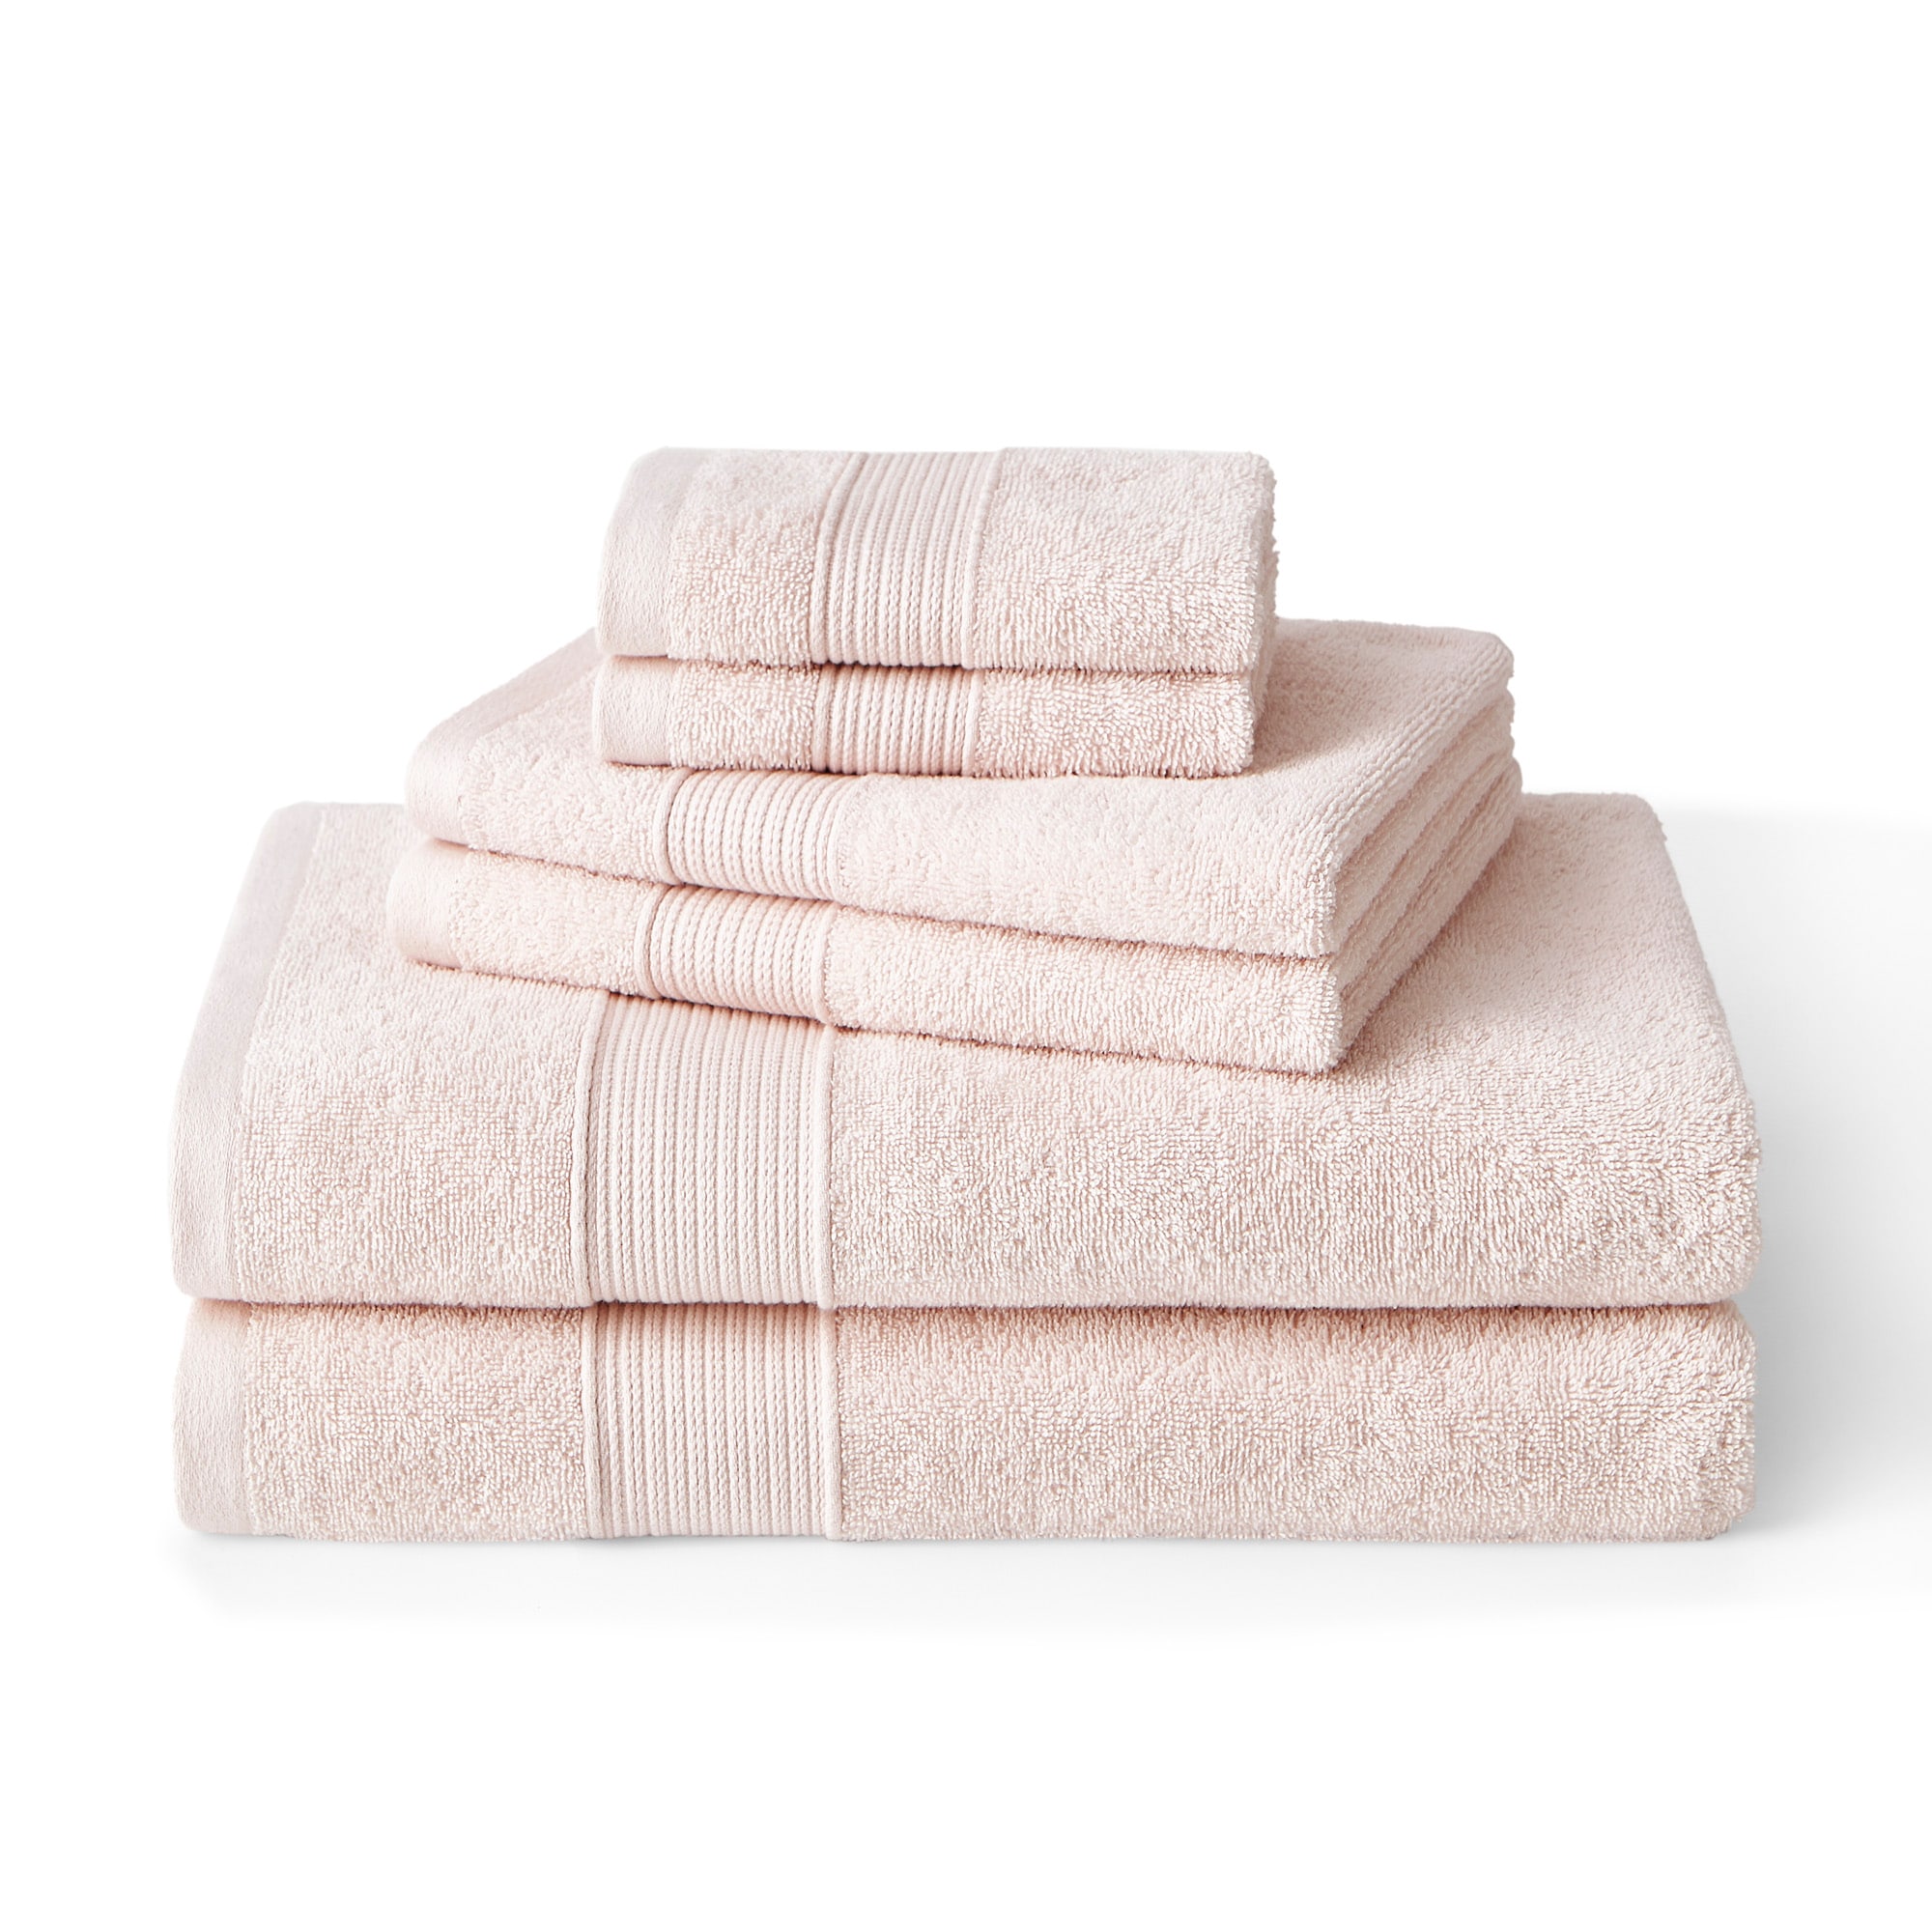 12 Bulk Embrodiered Cotton Bath Towels In White Size 30x58 - at 